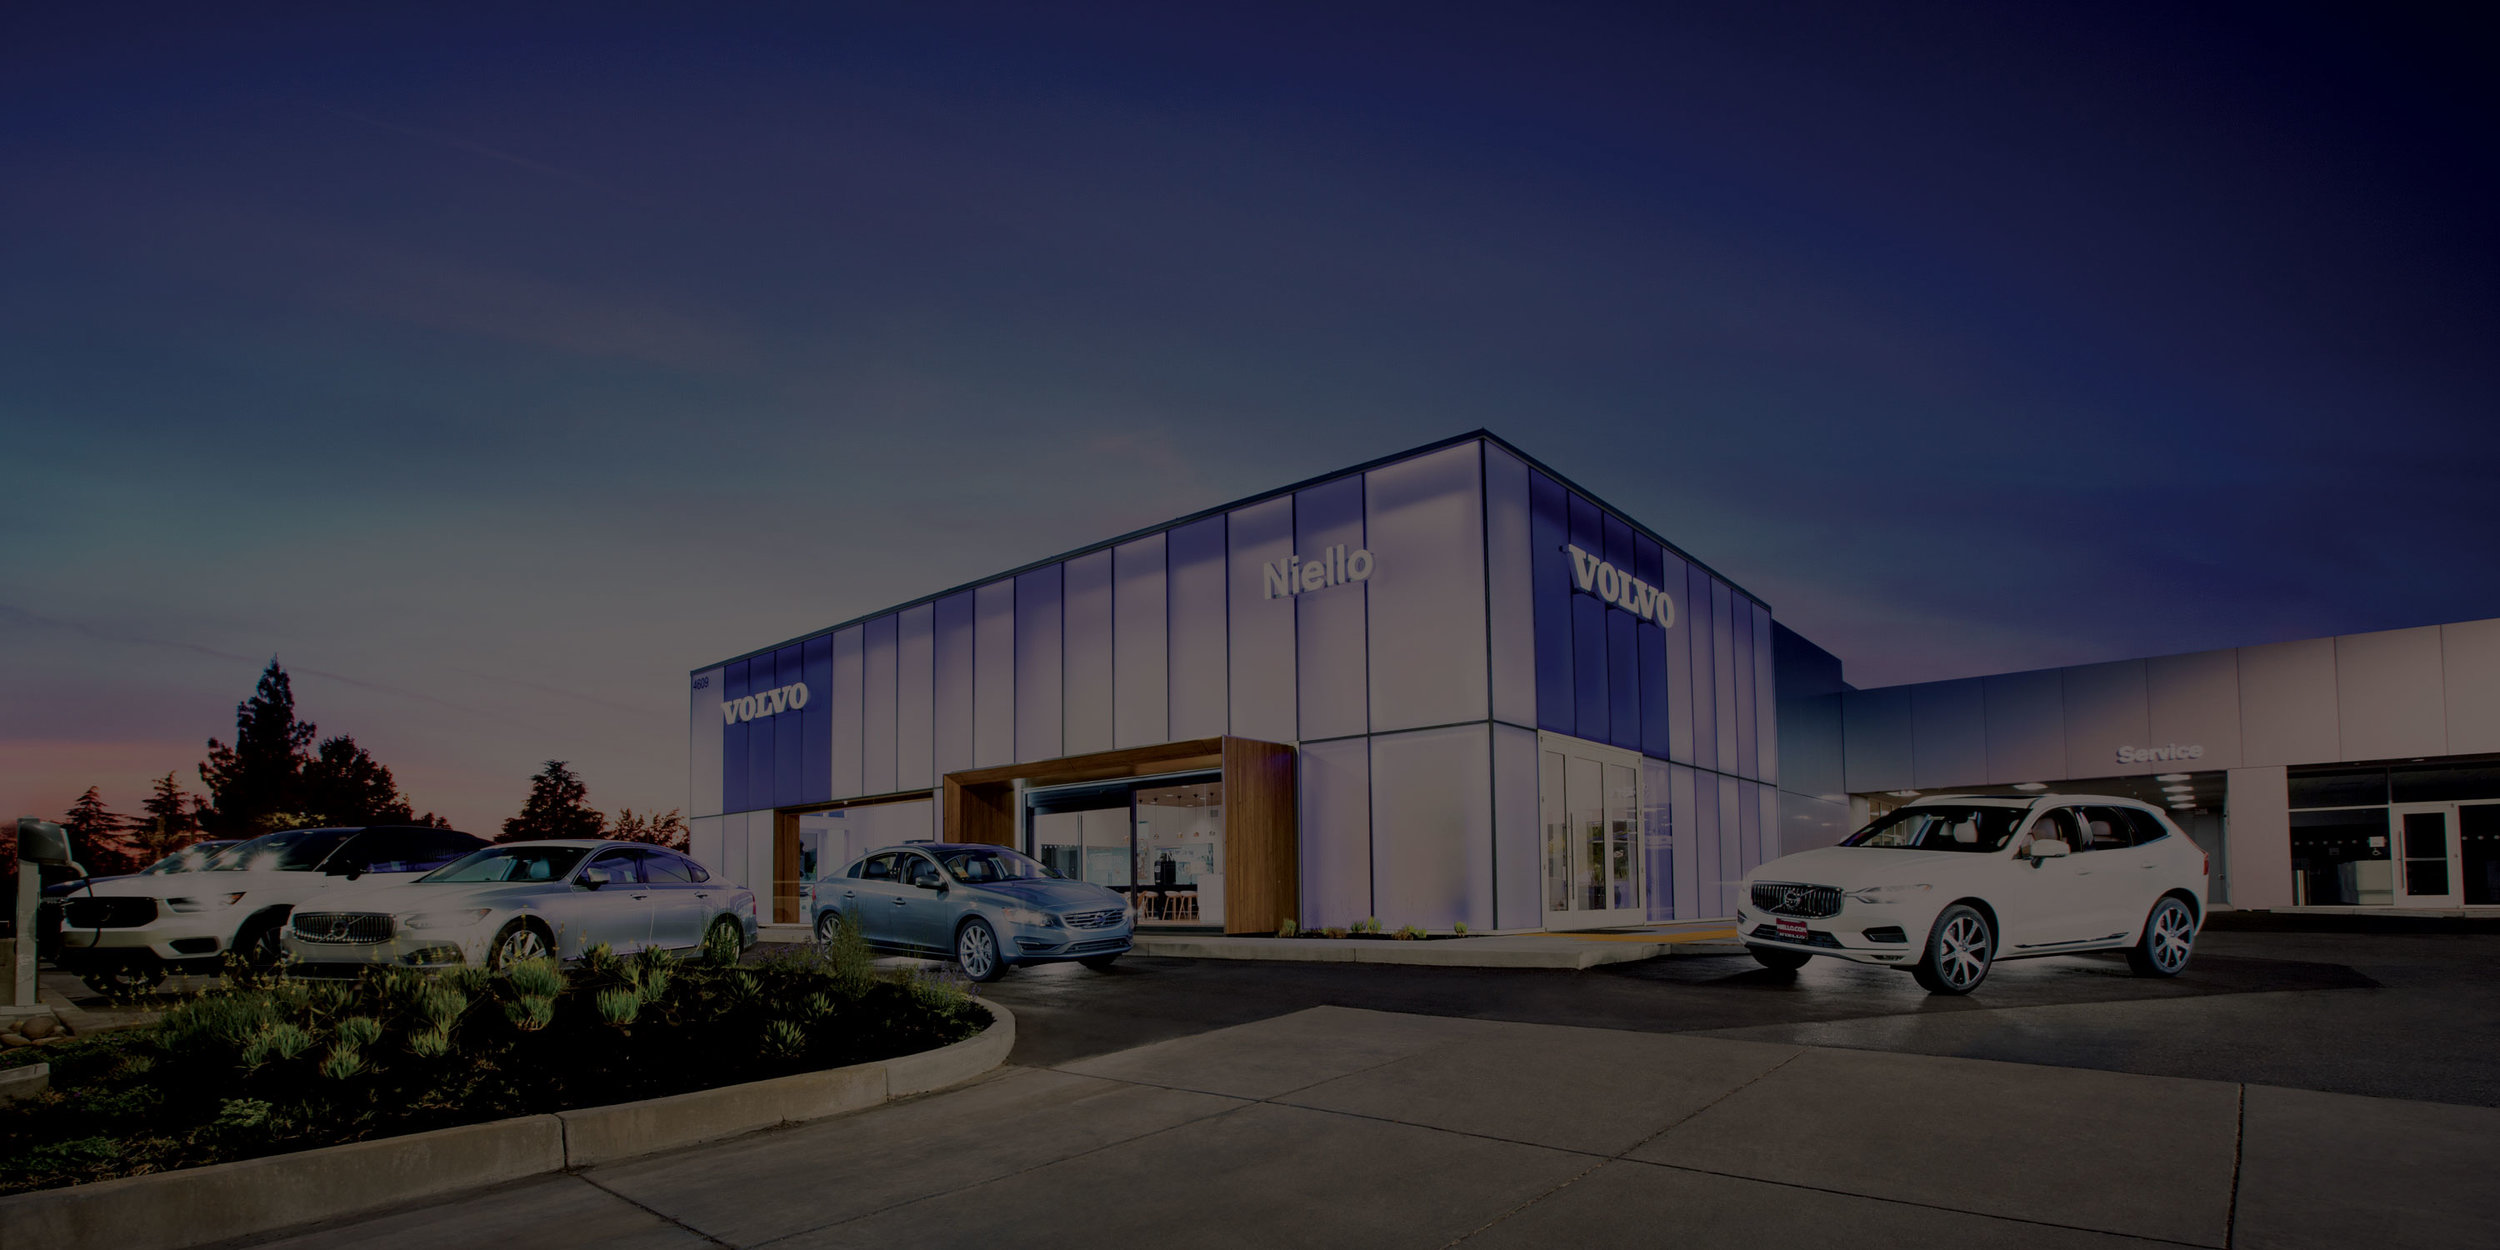  The new Volvo facility in Sacramento, California represents the contemporary luxury experience of the Volvo brand. The modern, etched glass façade contrasts the warm and comfortable interior that is uniquely Volvo and influenced by Scandinavian desi